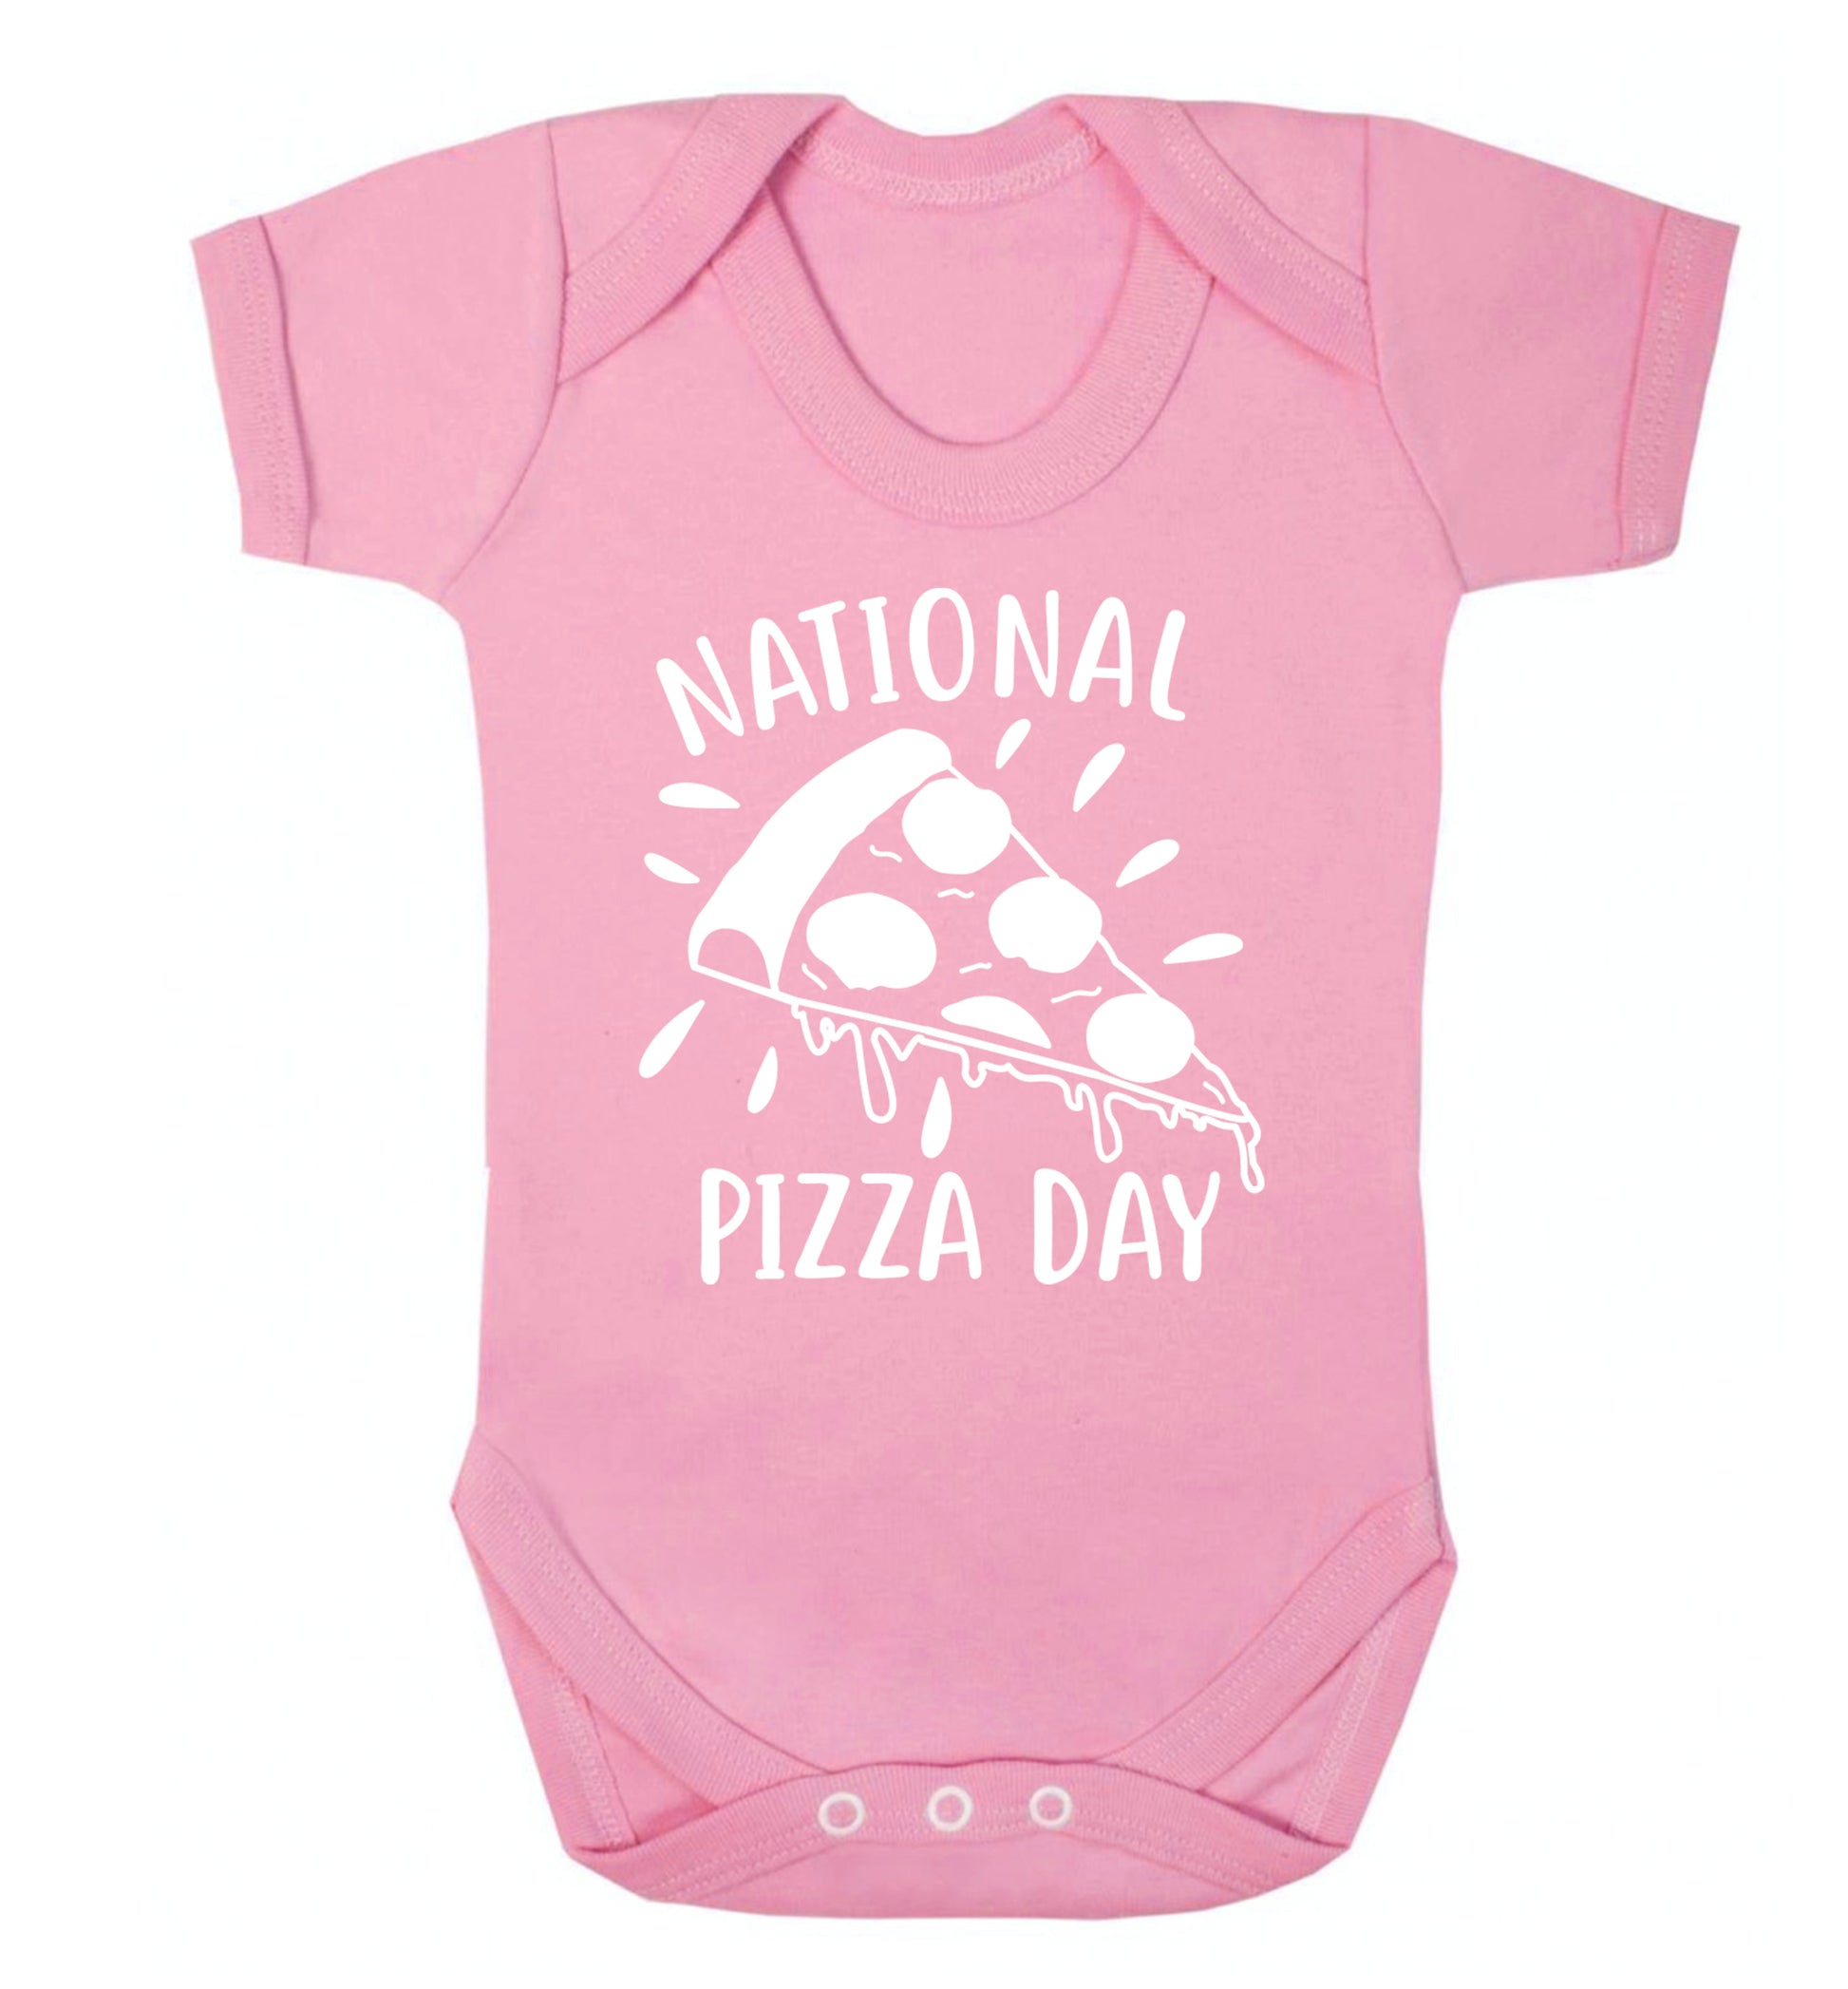 National pizza day Baby Vest pale pink 18-24 months